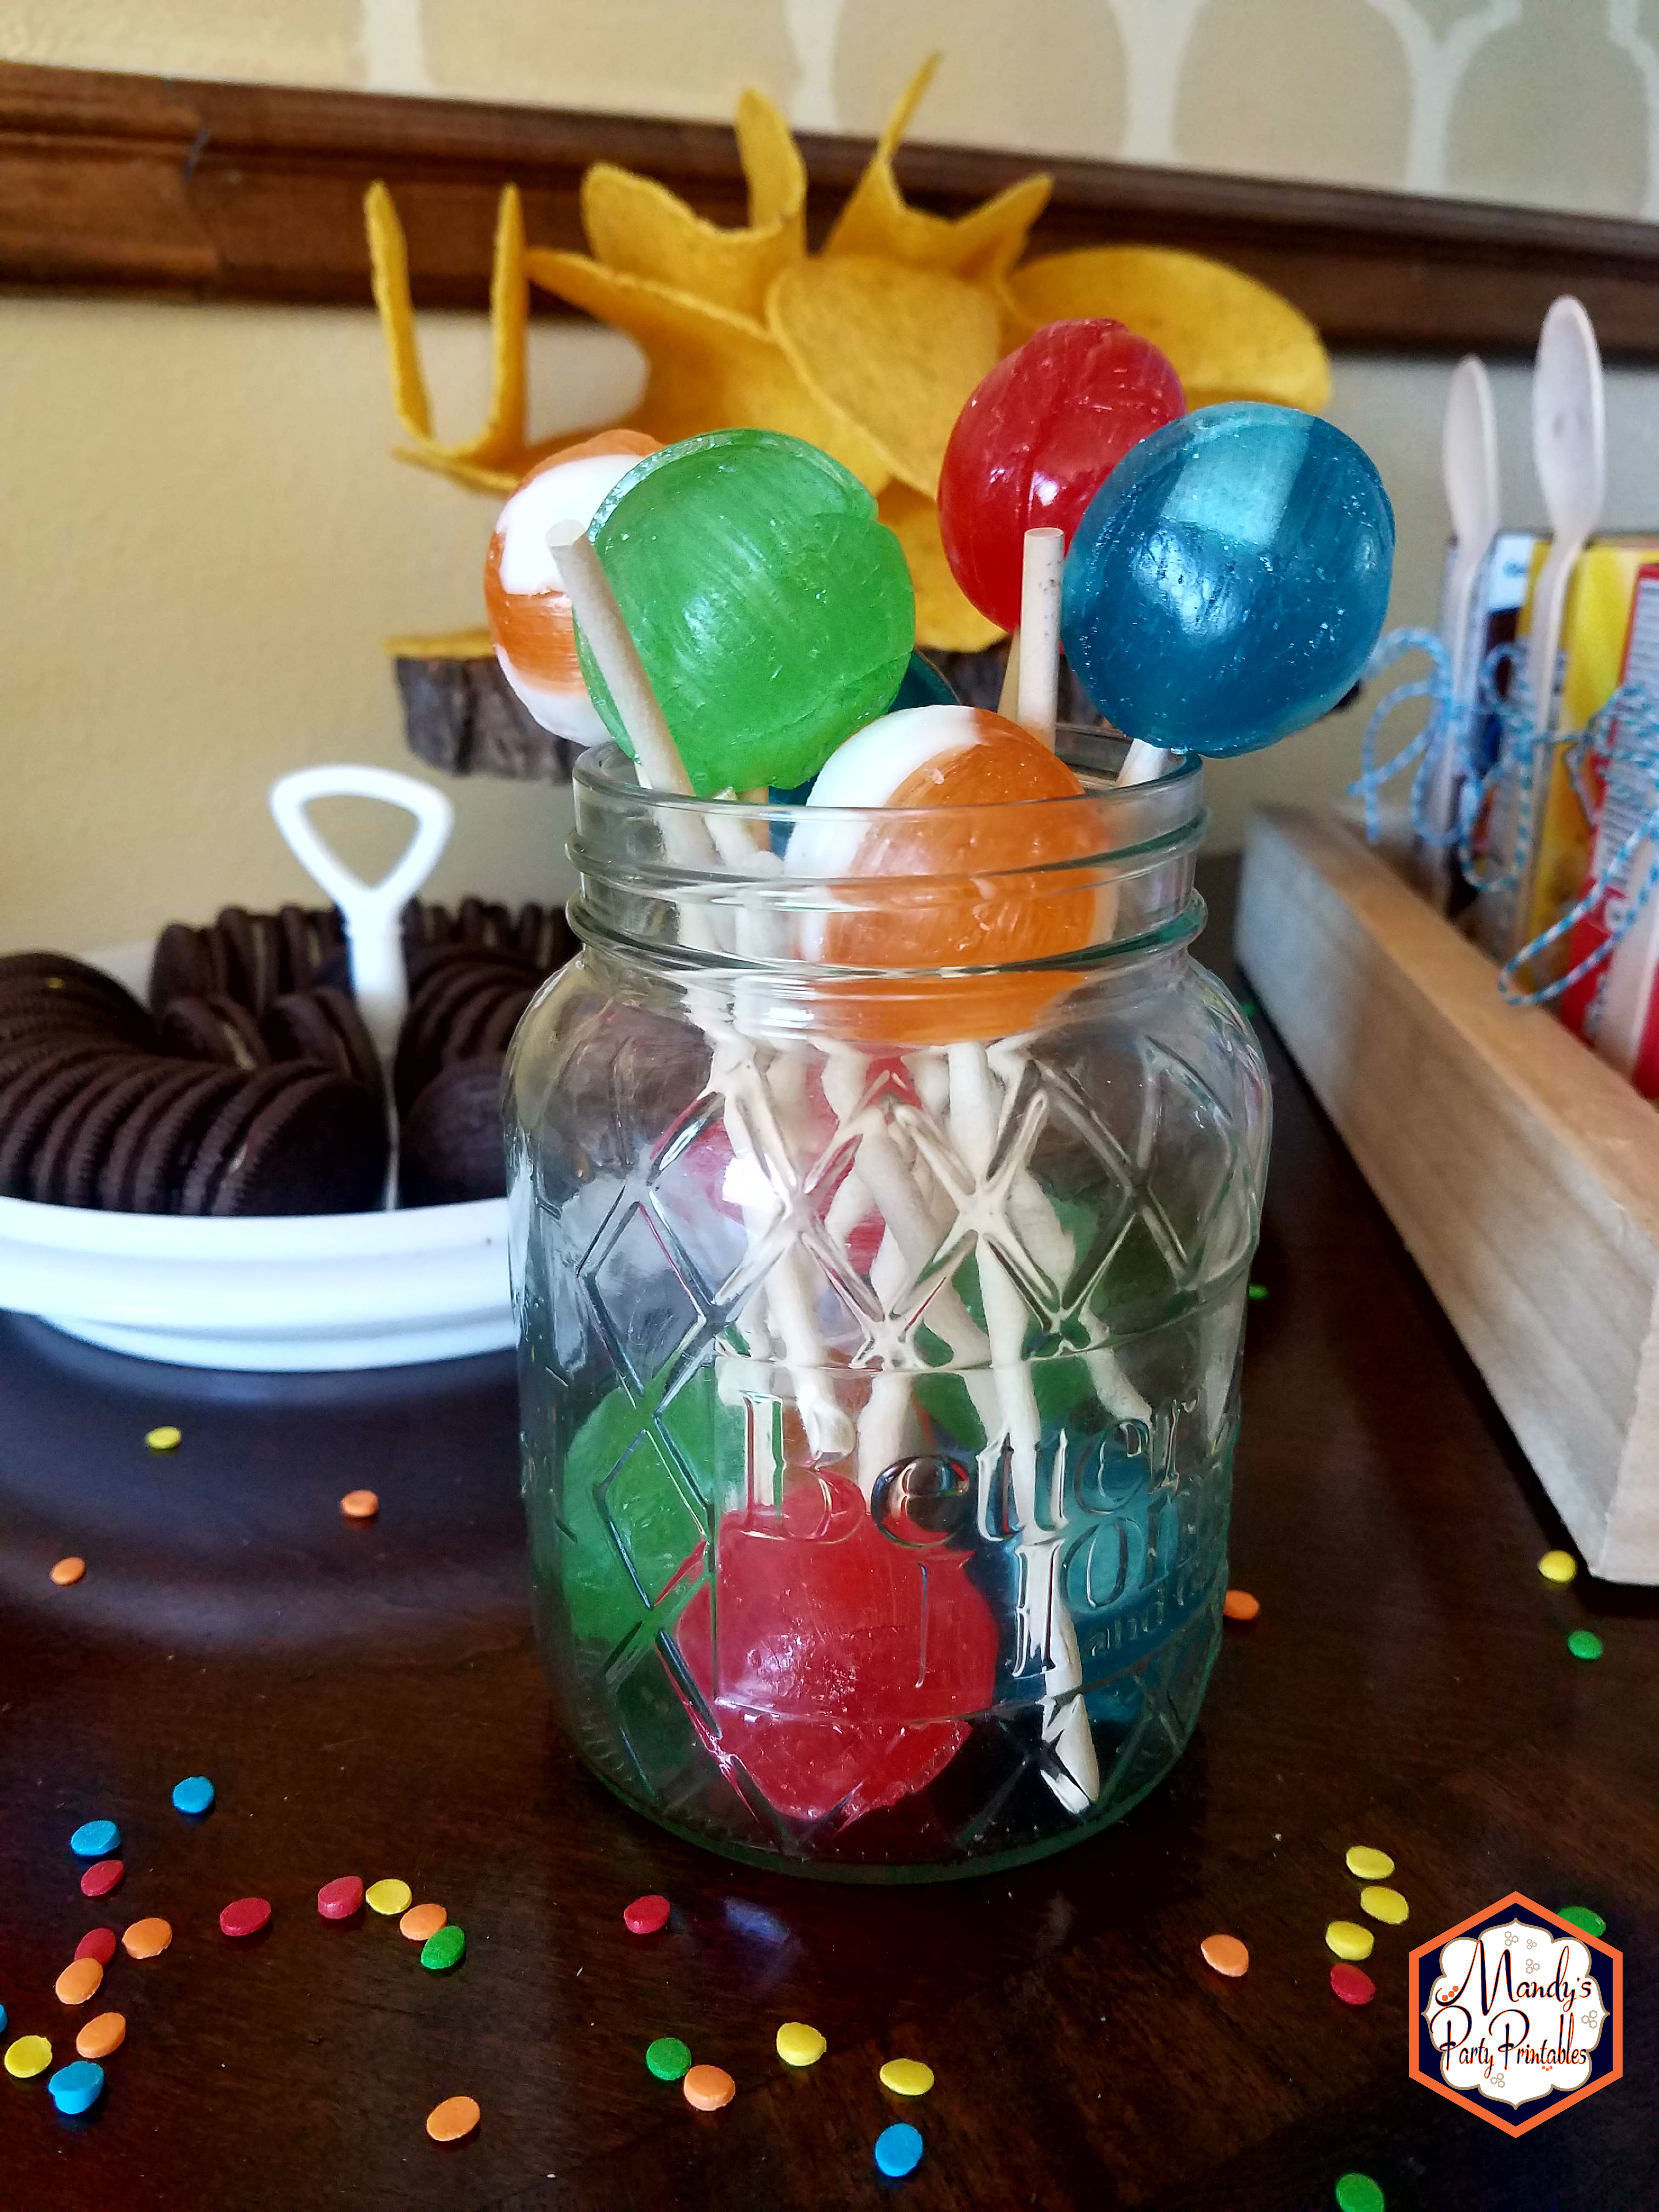 Lollipops from Good Mythical Morning Inspired Birthday Party via Mandy's Party Printables